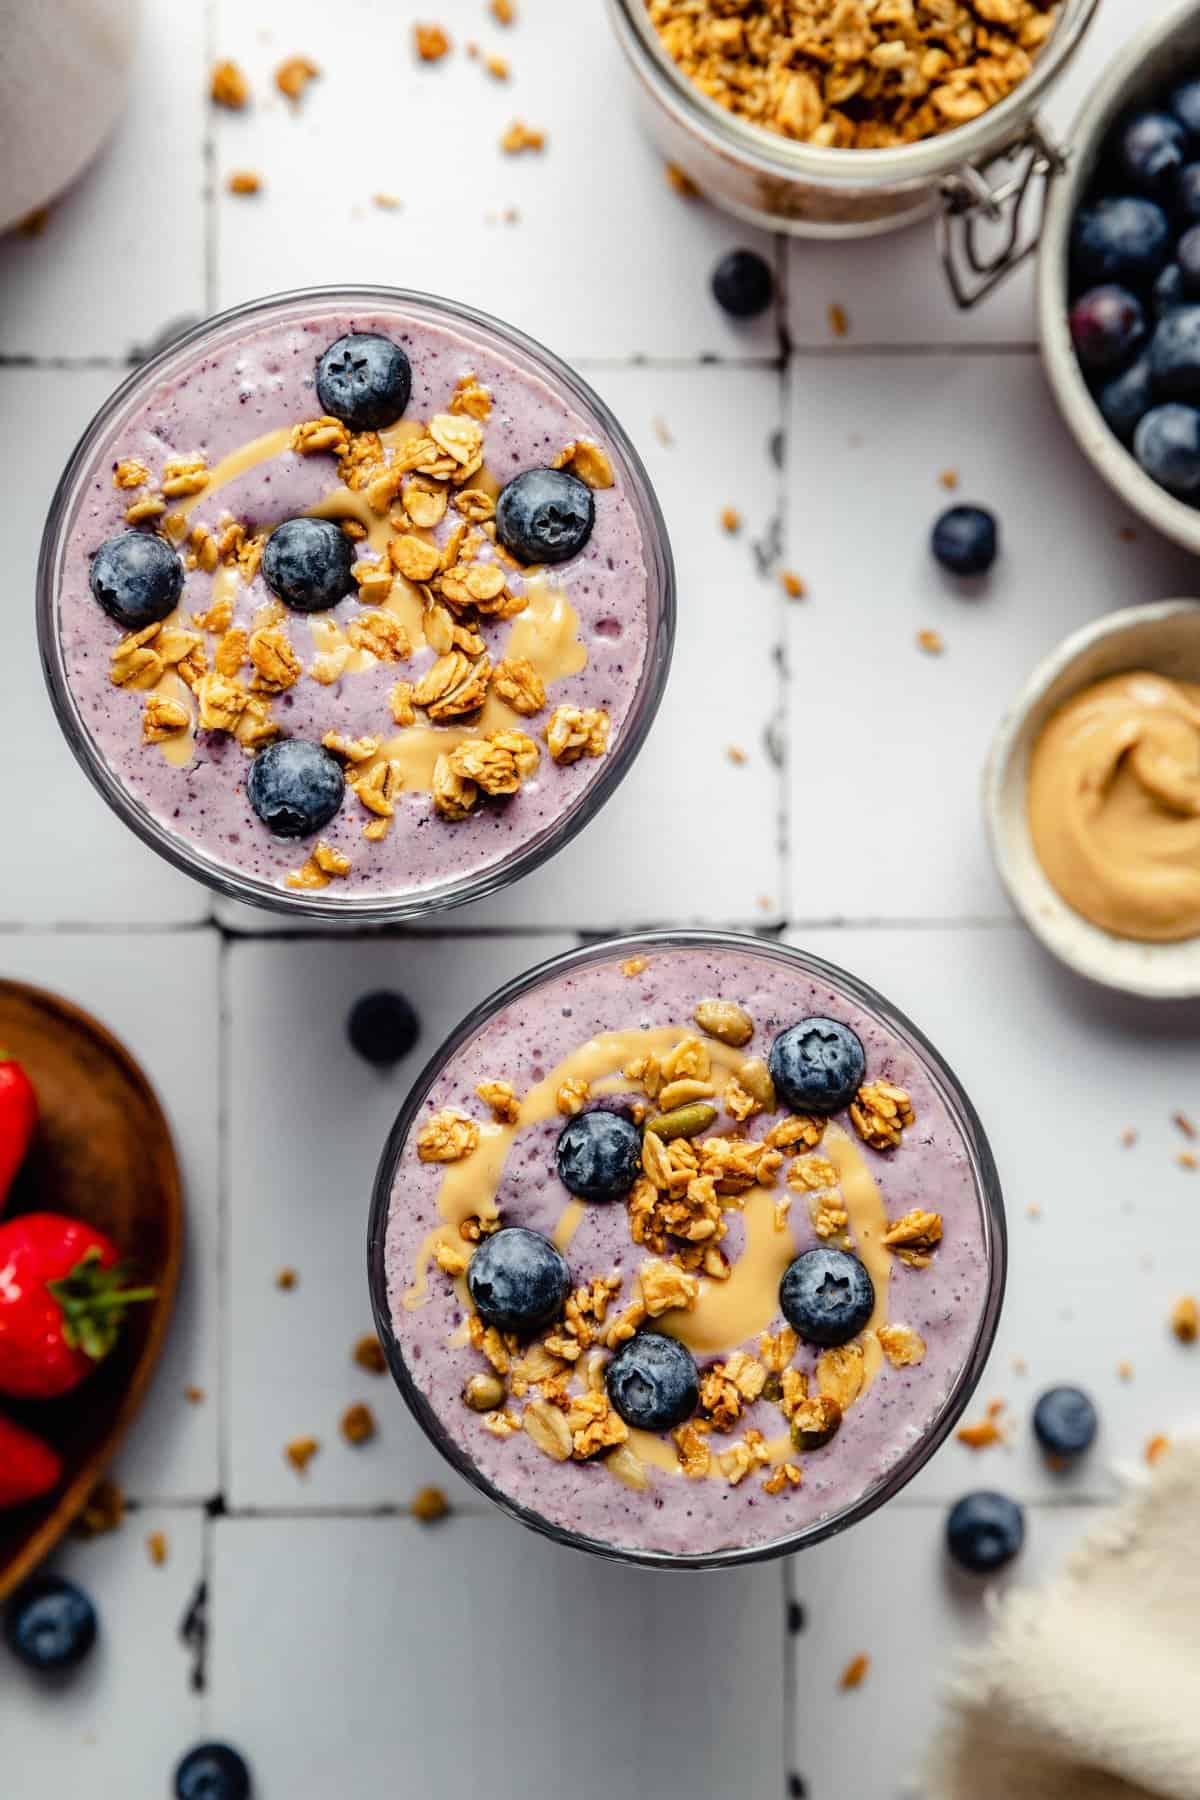 Strawberry blueberry smoothie served in glasses topped with cashew butter, blueberries and granola.